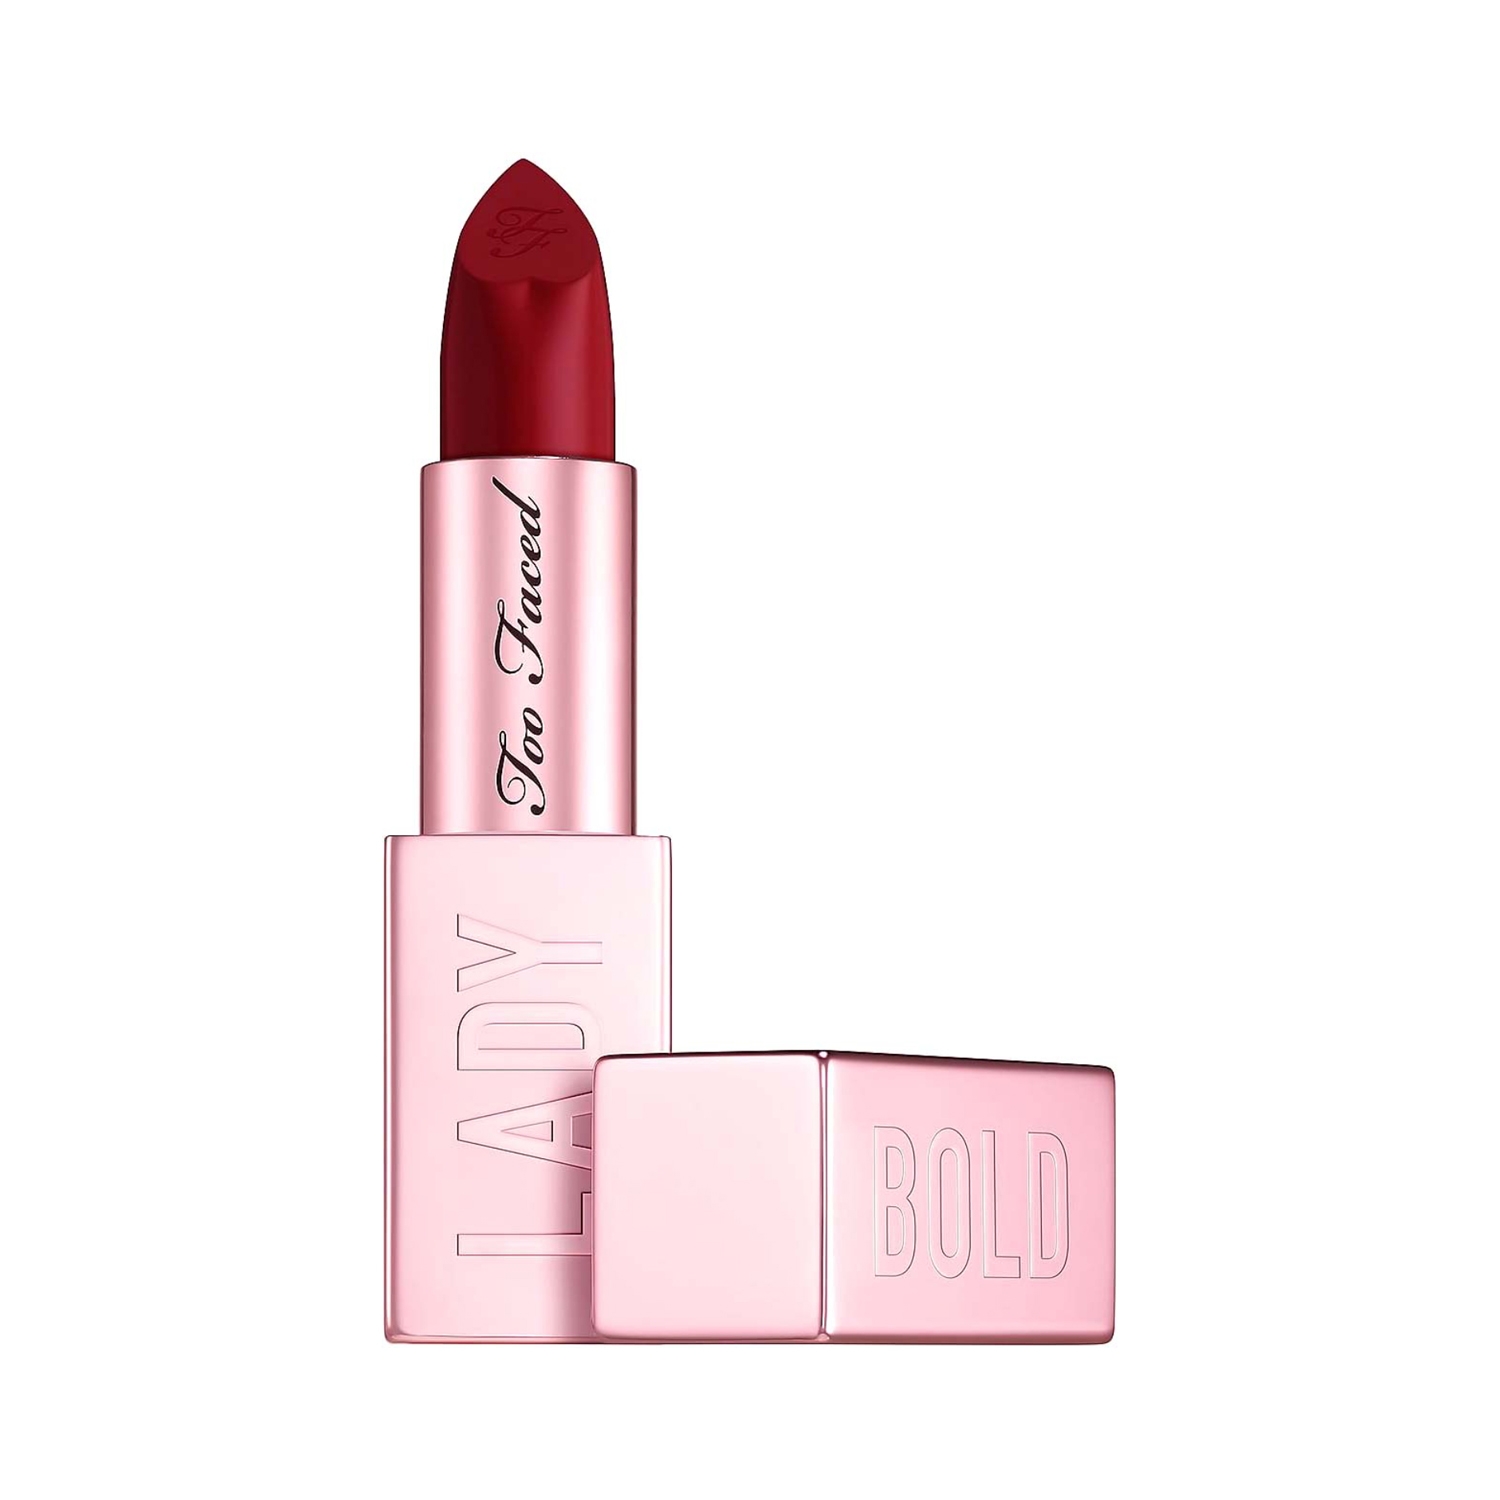 Too Faced | Too Faced Lady Bold Cream Lipstick - Take Over (4g)